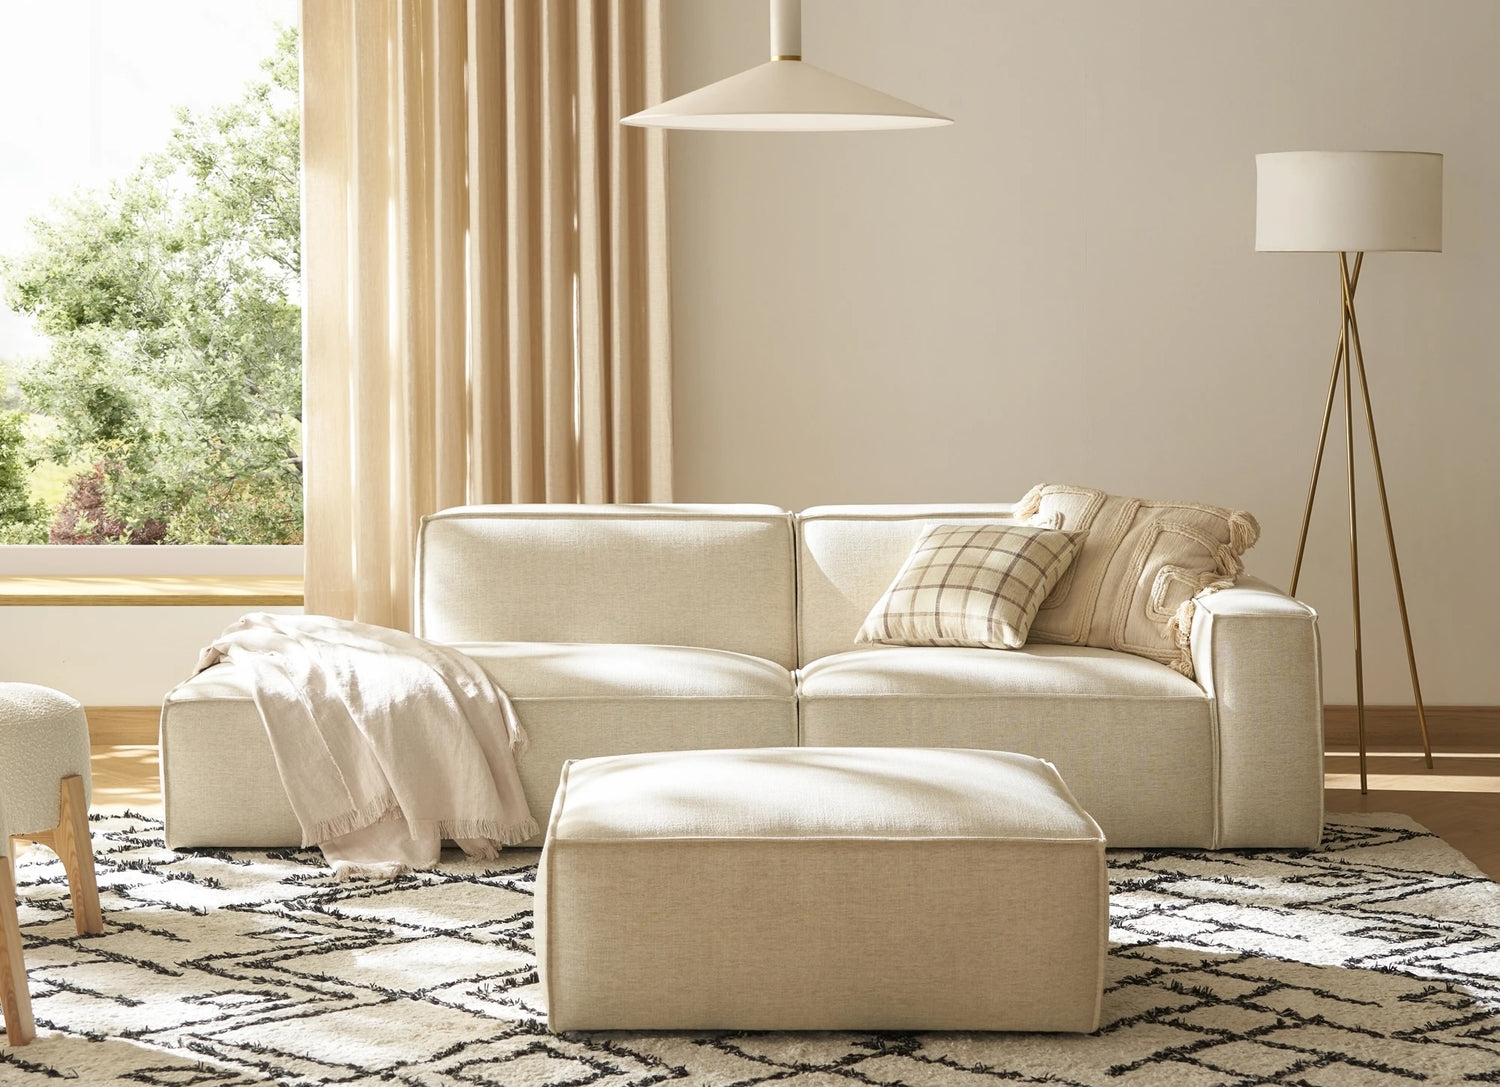 A cozy living room features a beige sofa with pillows and a matching ottoman. A soft blanket is draped over the sofa. The space is adorned with a floor lamp, large window with light curtains, and patterned rug, creating a serene ambiance.